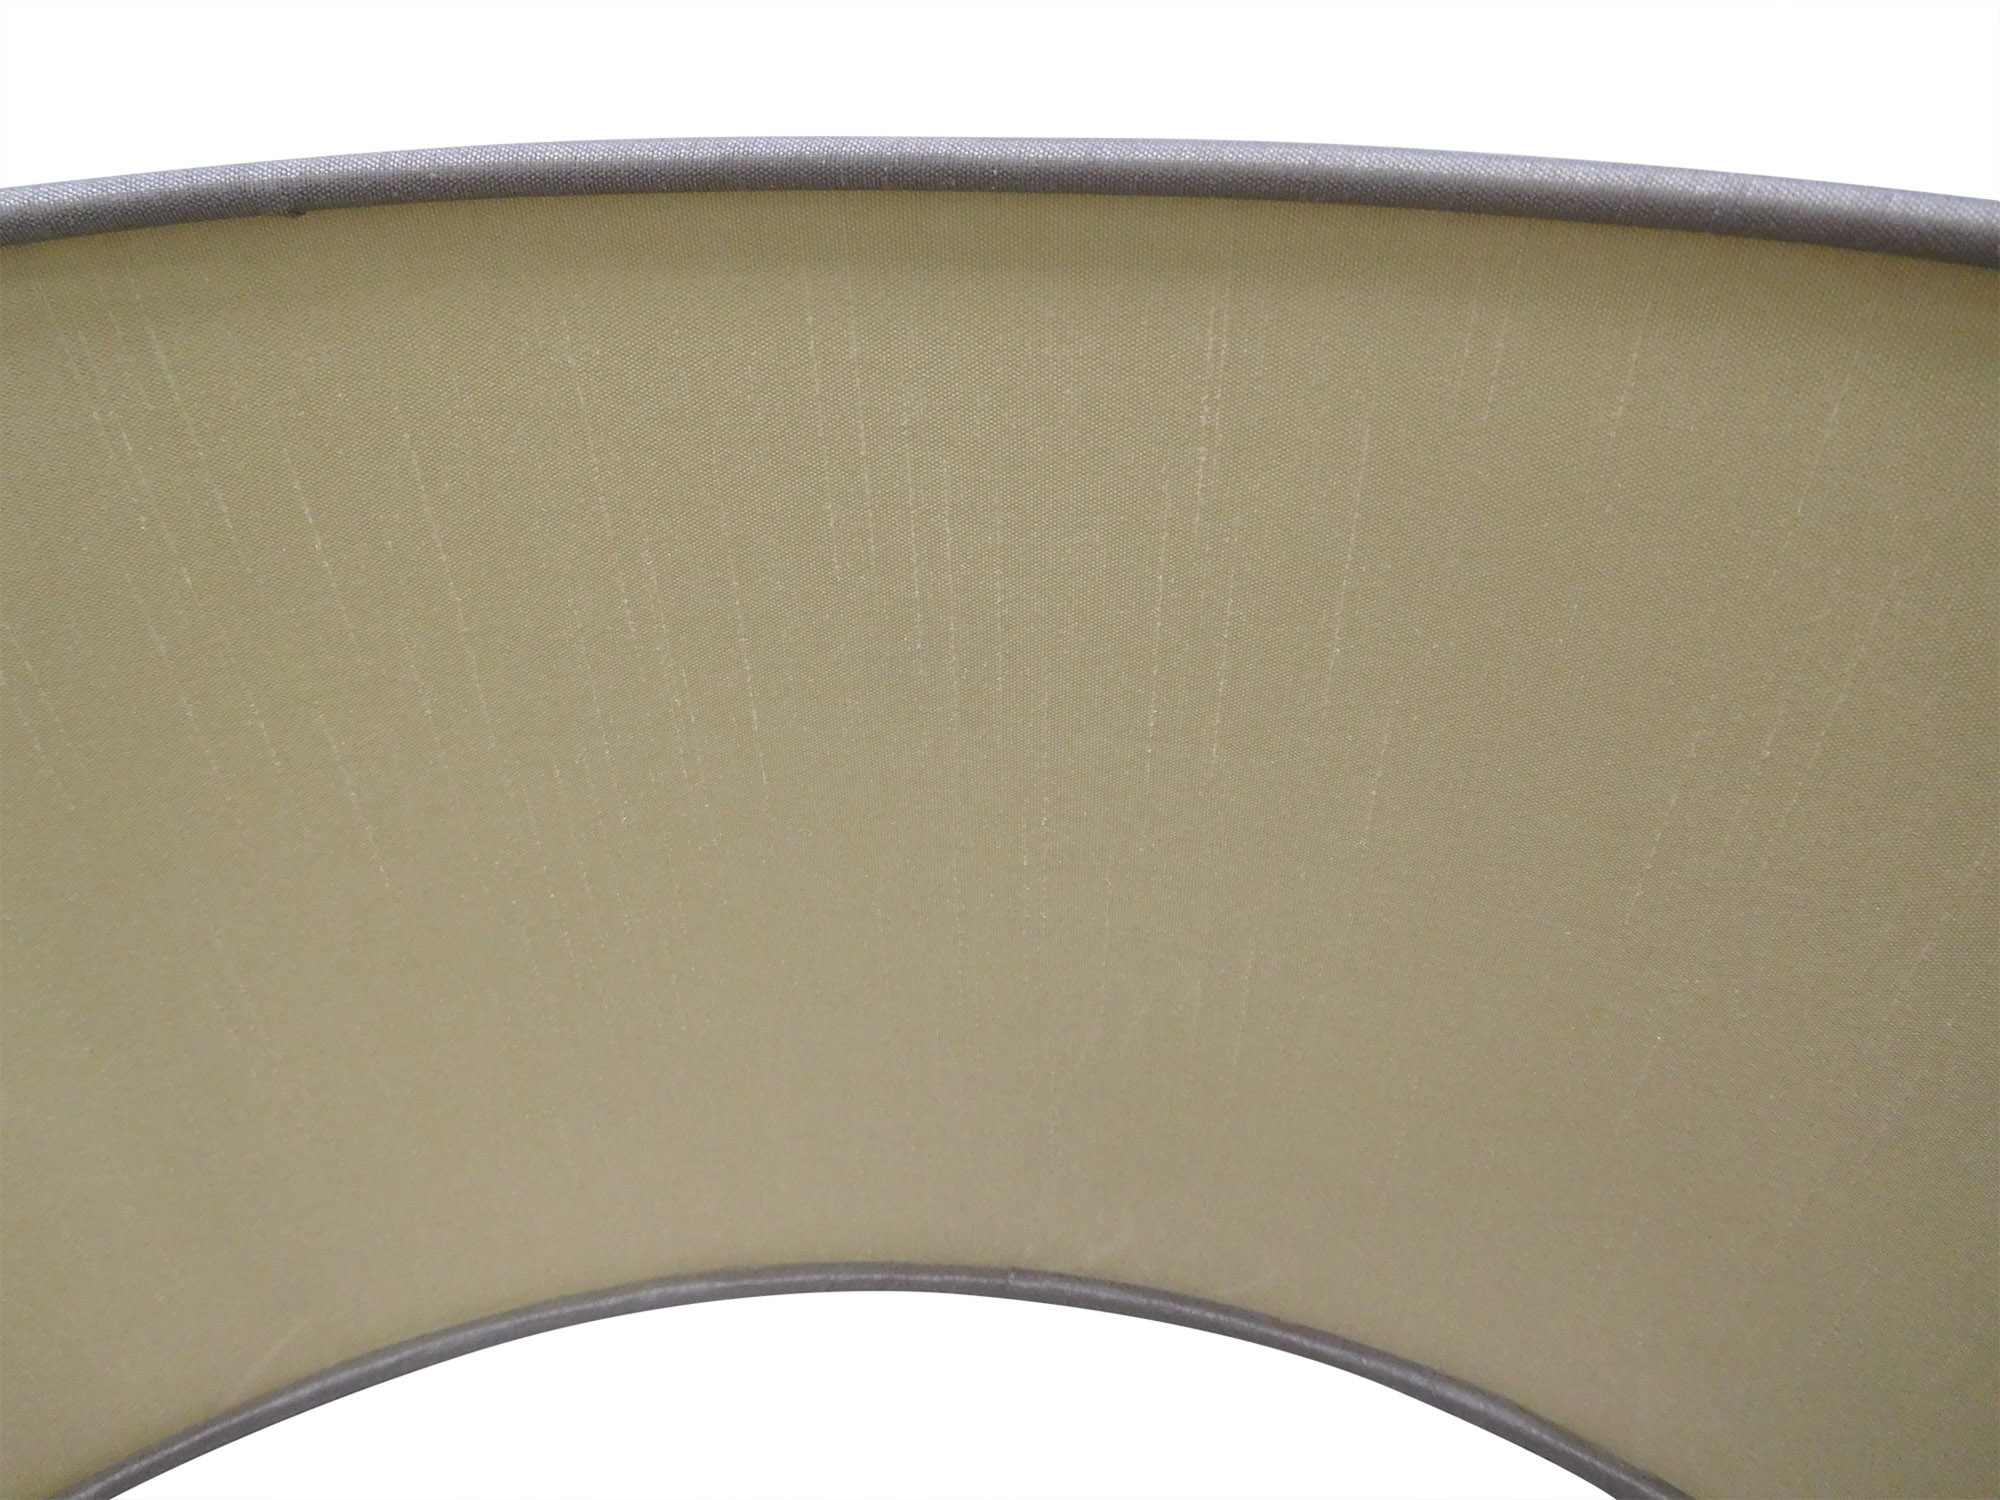 Baymont 40cm Flush 3 Light Taupe/Halo Gold; Frosted Diffuser DK0618  Deco Baymont WH TA